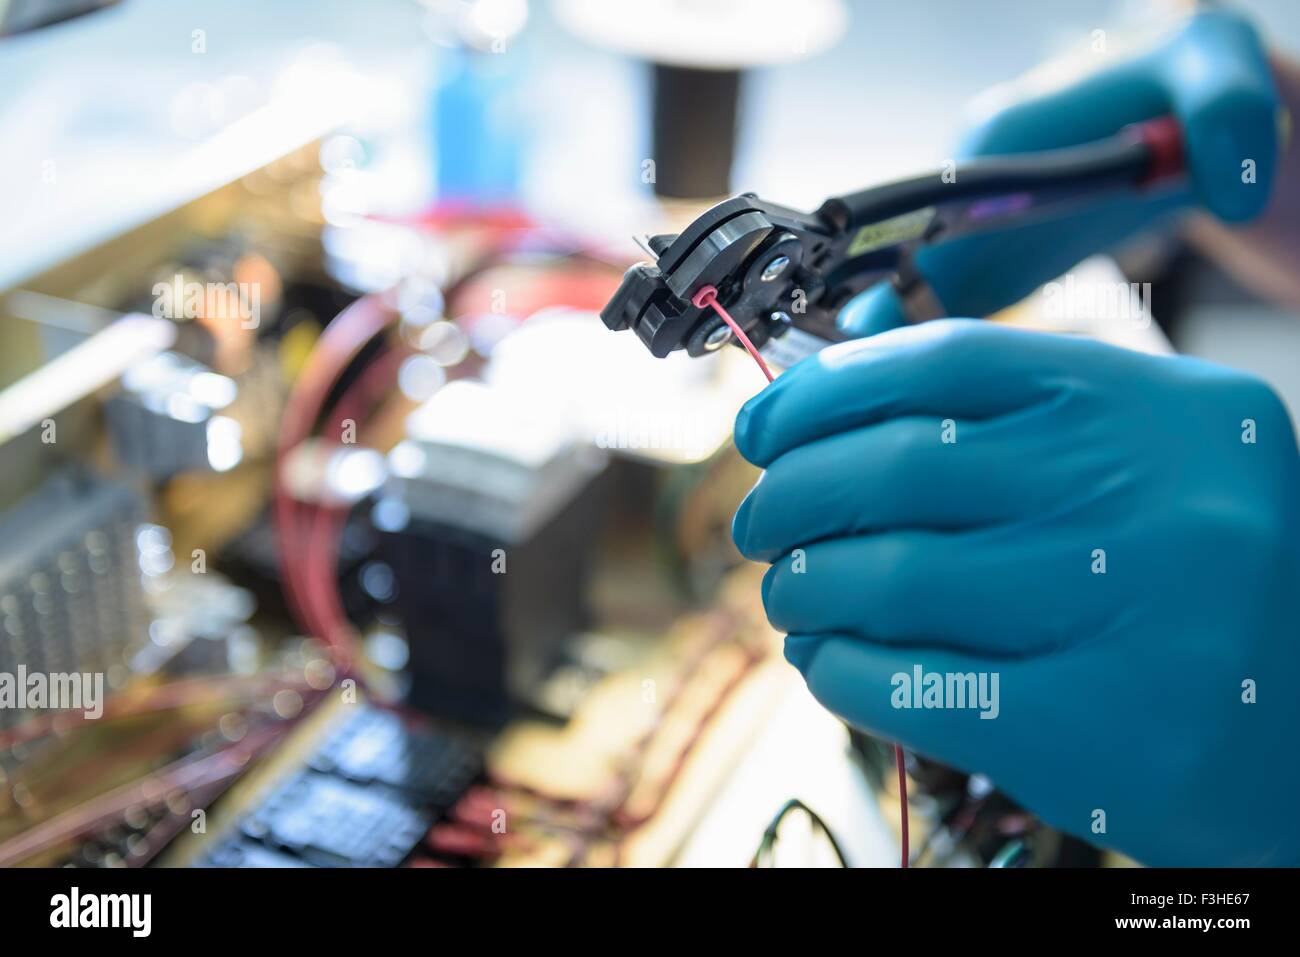 Worker assembling electronics in electronics factory, focus on hands Stock Photo